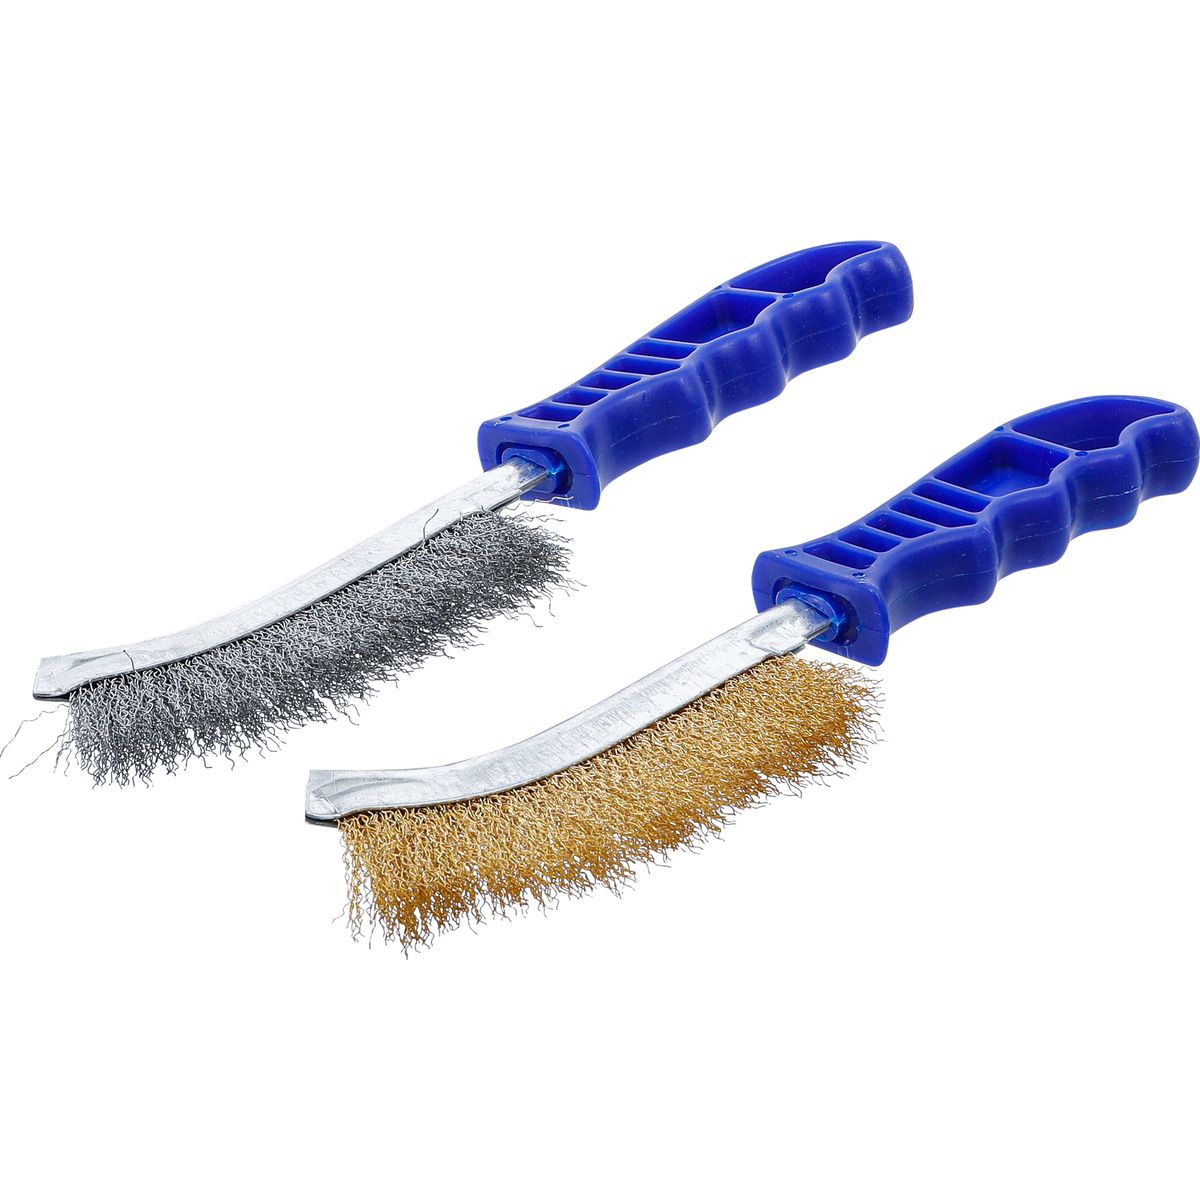 Steel Wire Brush Set | steel and brass coated steel | 260 mm | 2 pcs.